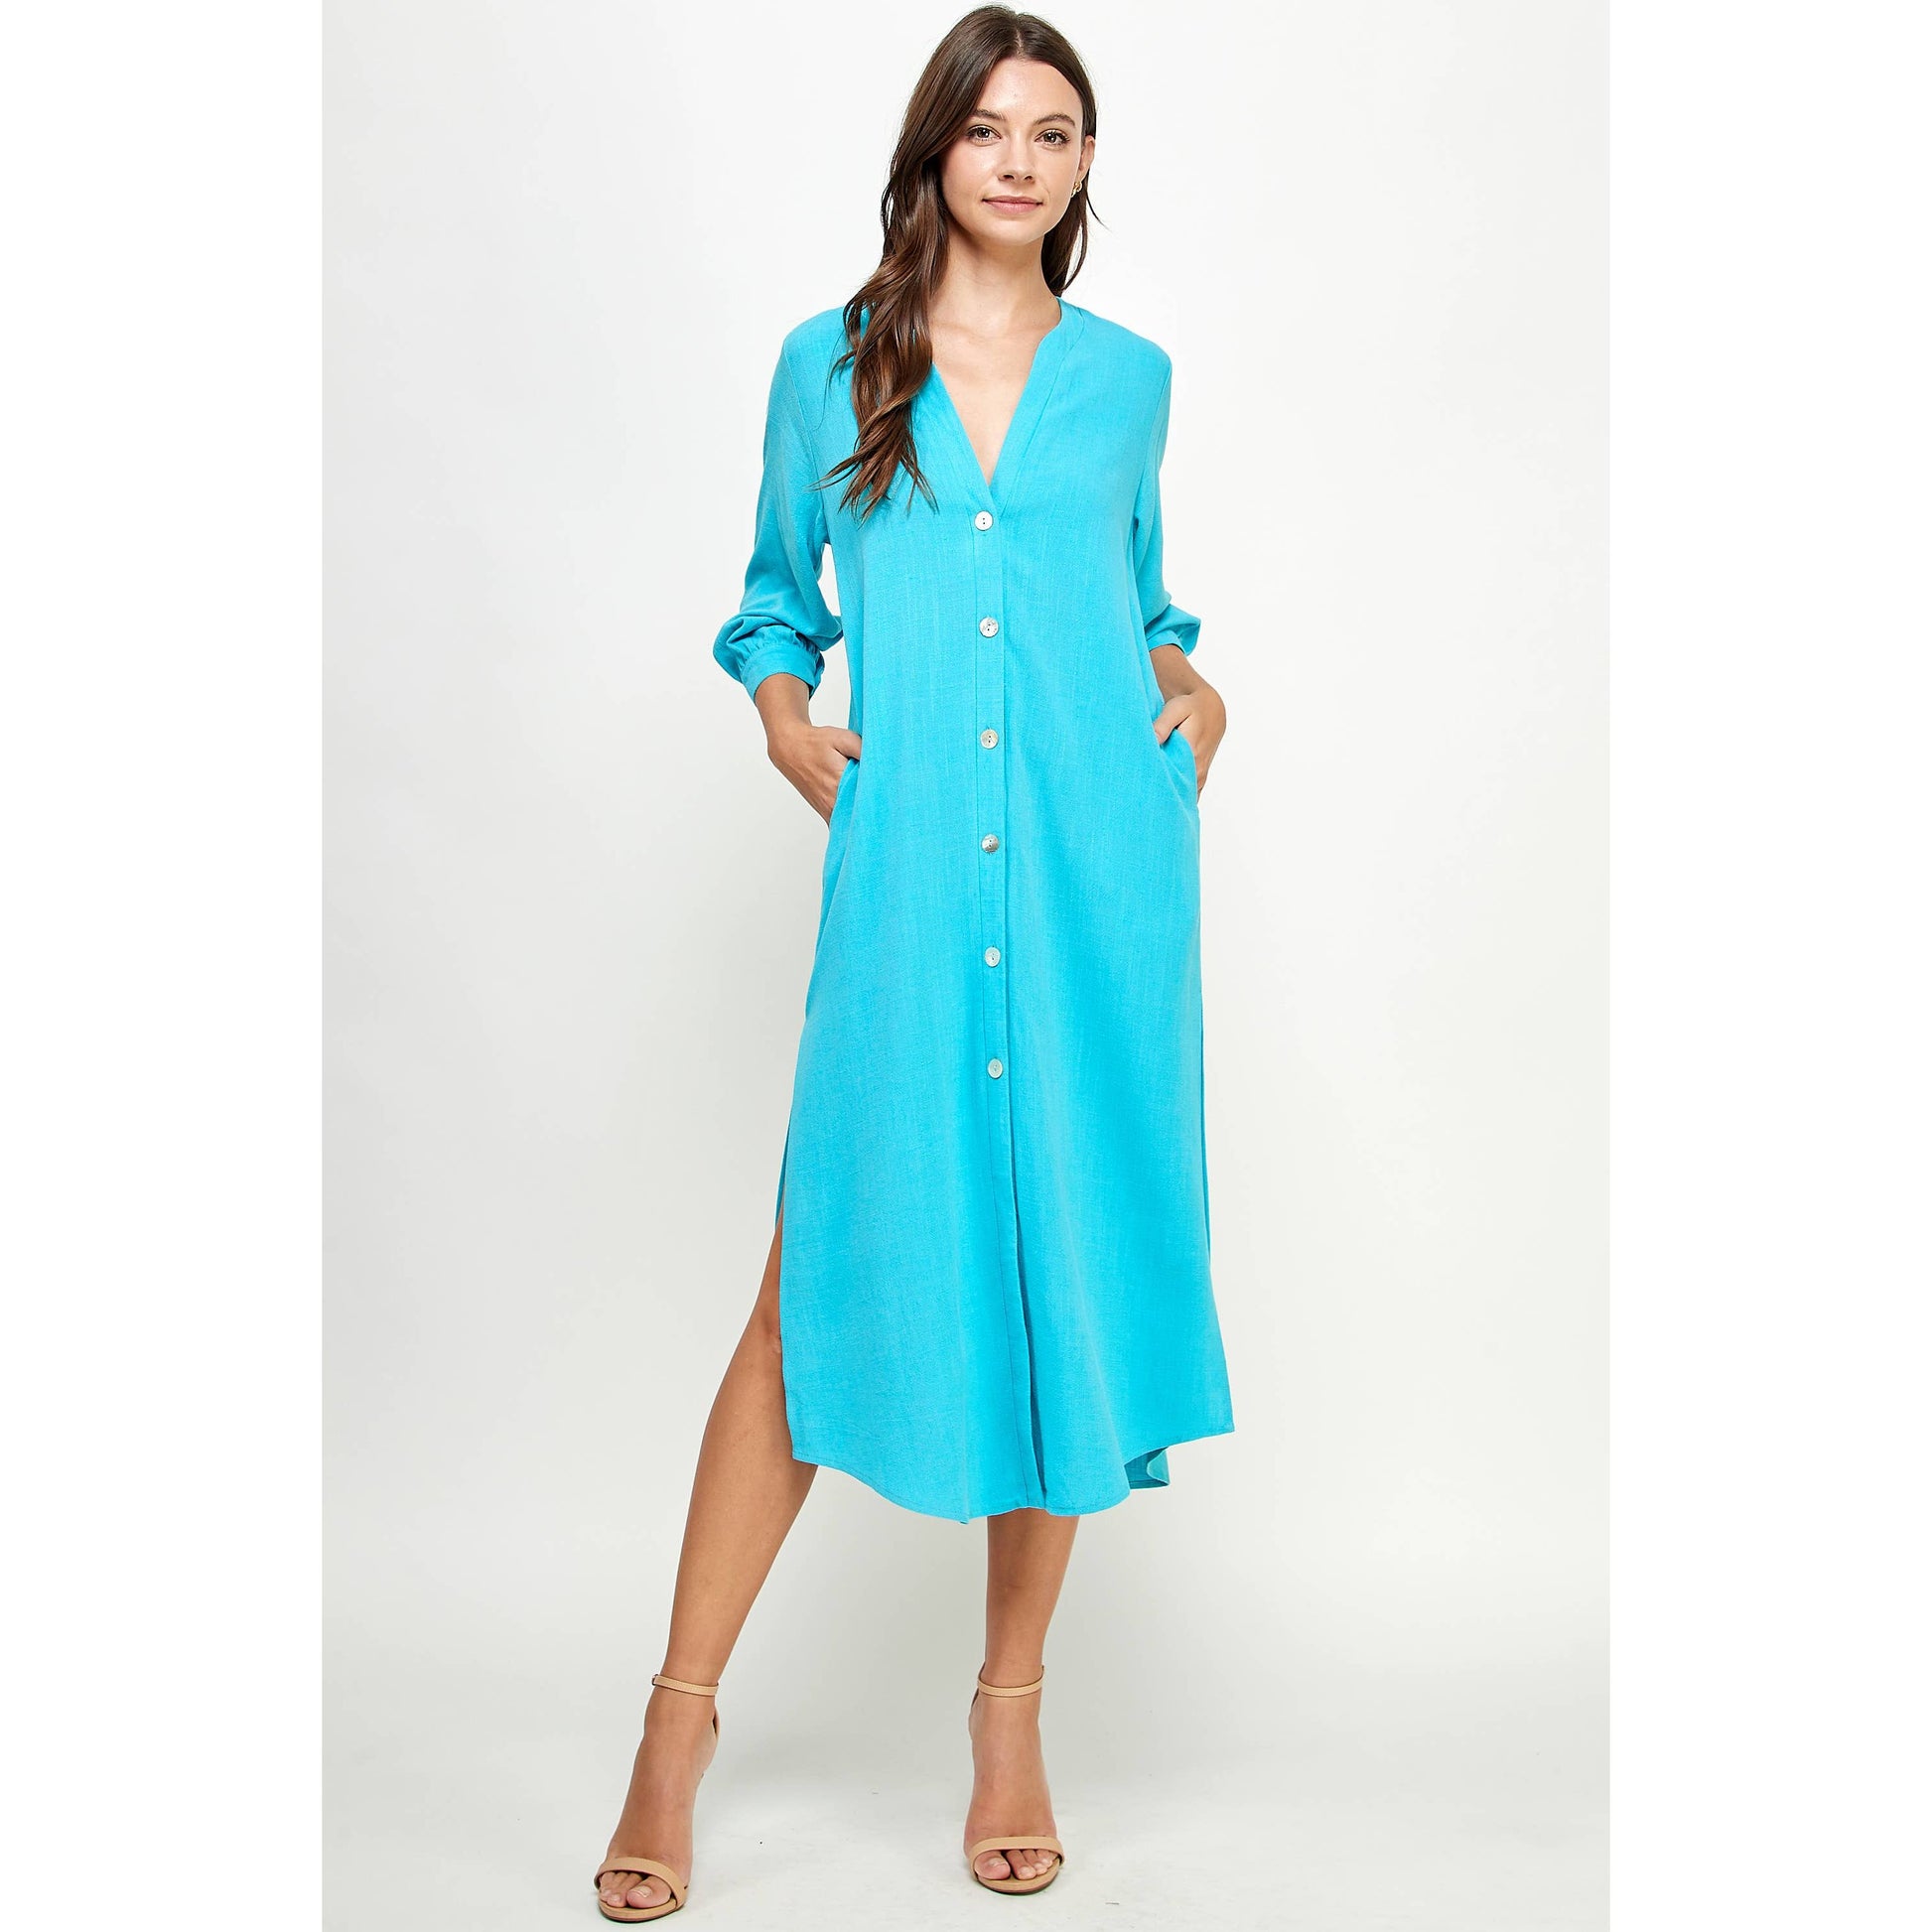 Blue V-Neck Button Down Linen Dress by Ellison Apparel.  Available in sizes Small through Large.  70% Viscose, 30% Linen.